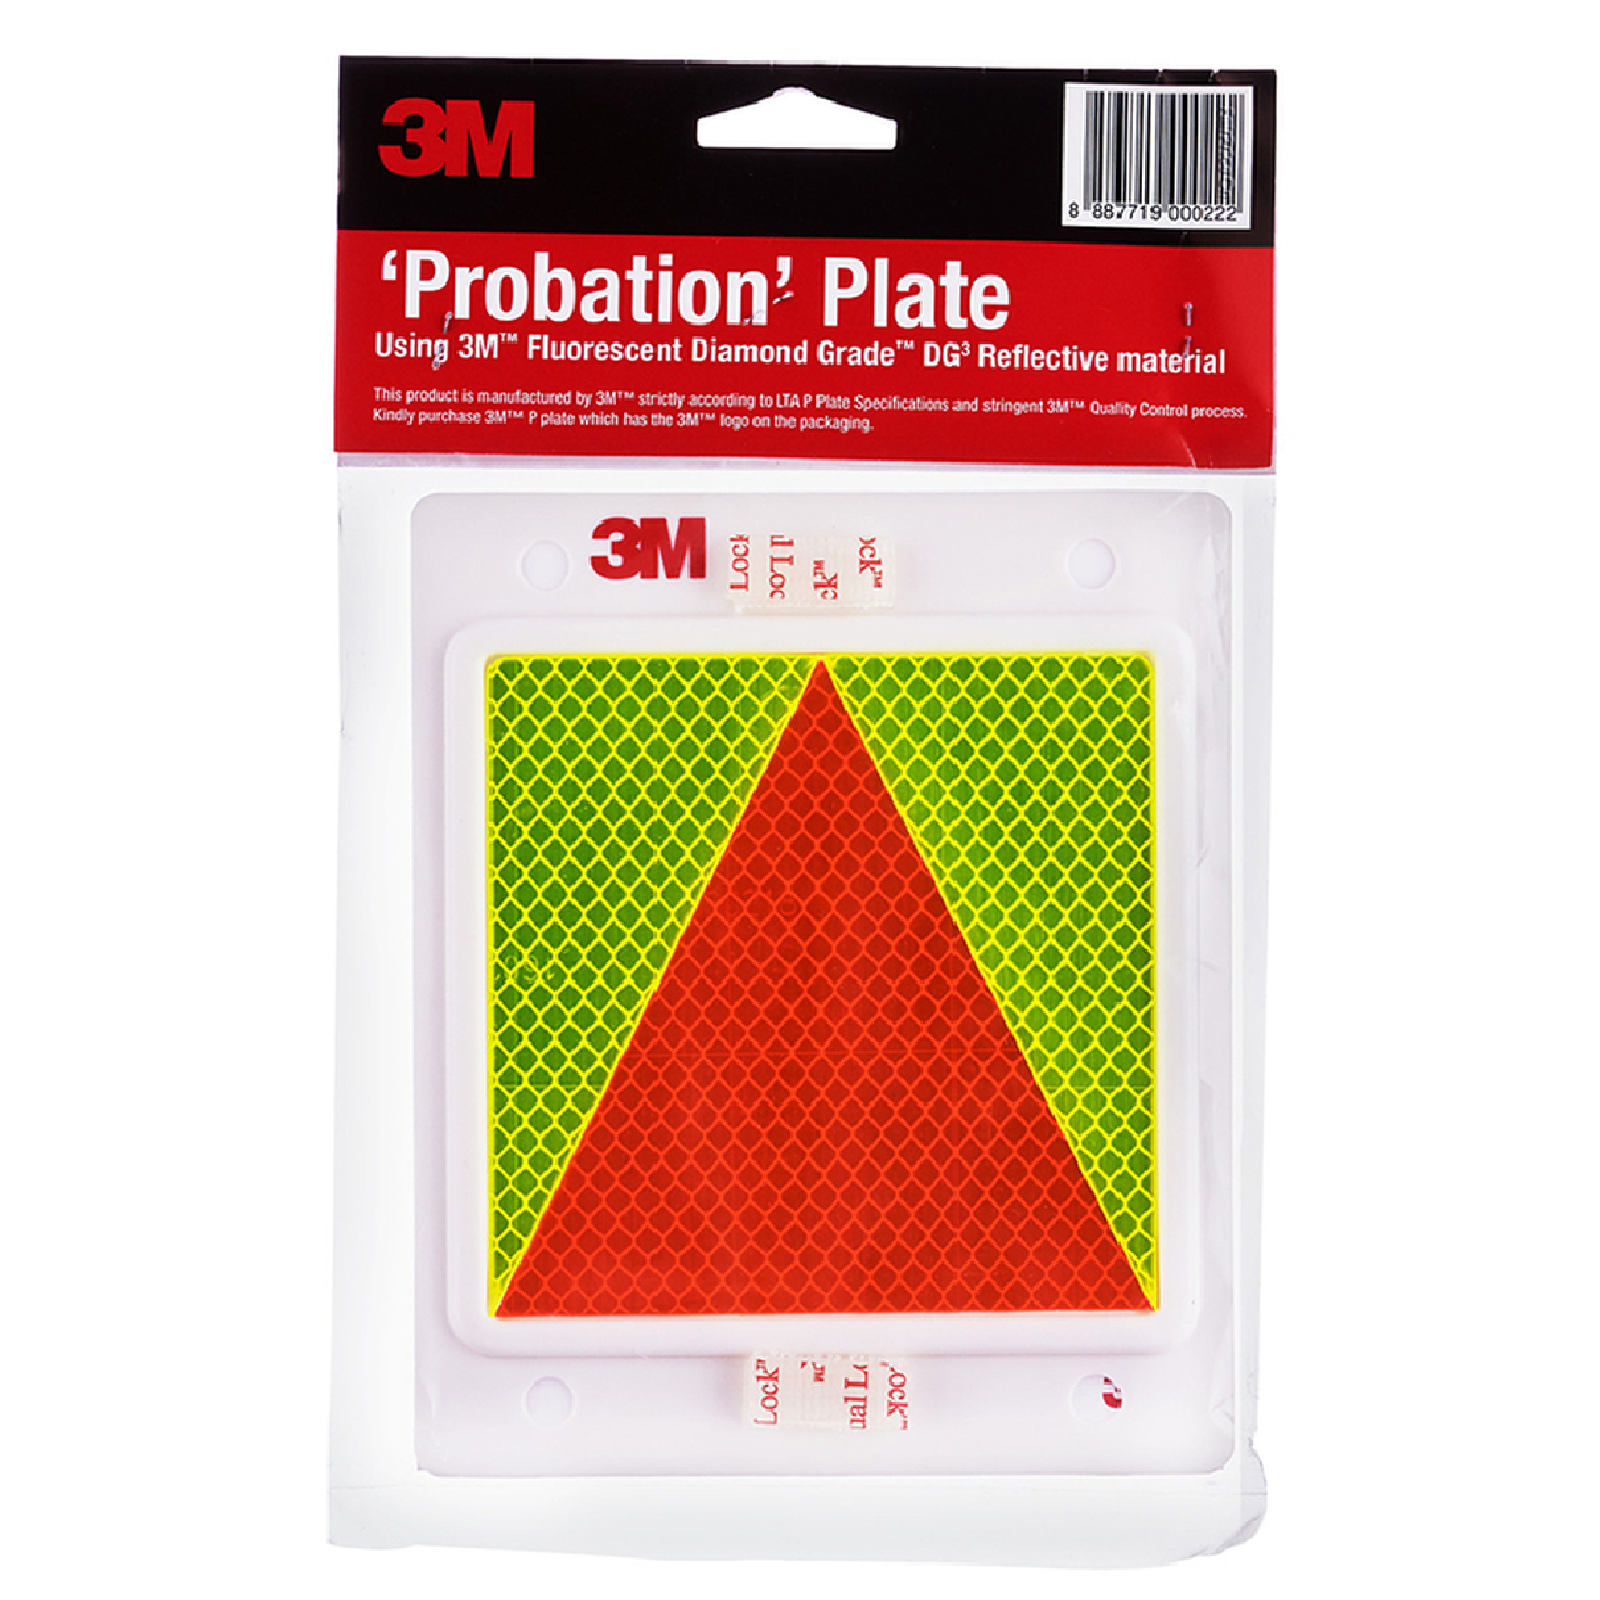 3M Probation Plate (Reflective License Plate)